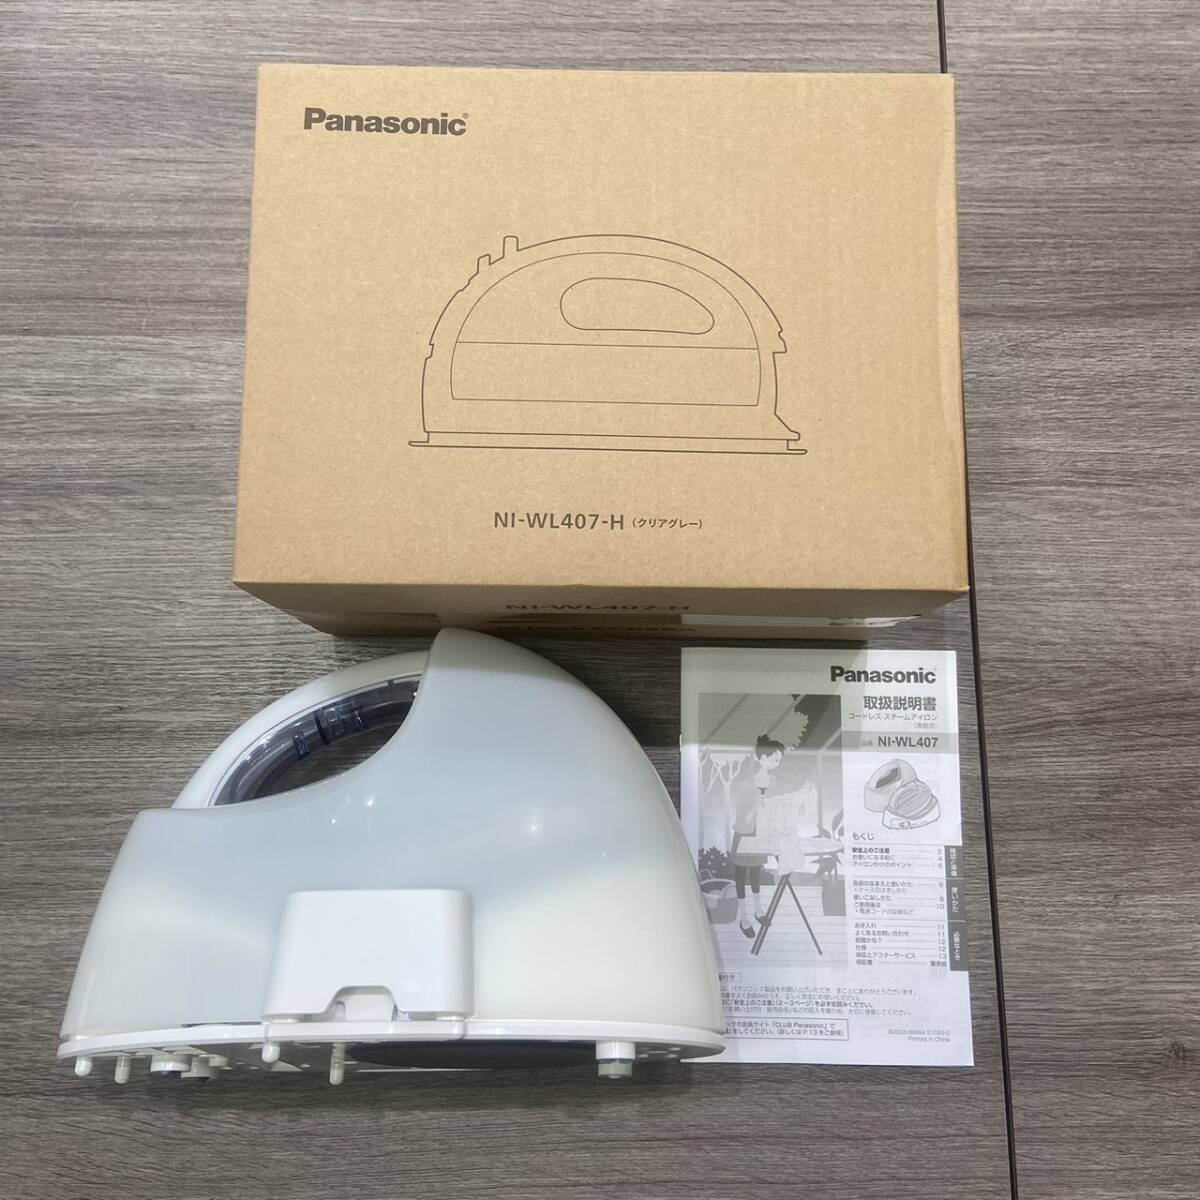 [B-13953] 1 jpy start Panasonic cordless steam iron NI-WL407 clear gray box attaching owner manual attaching electrification has confirmed condition photograph reference 